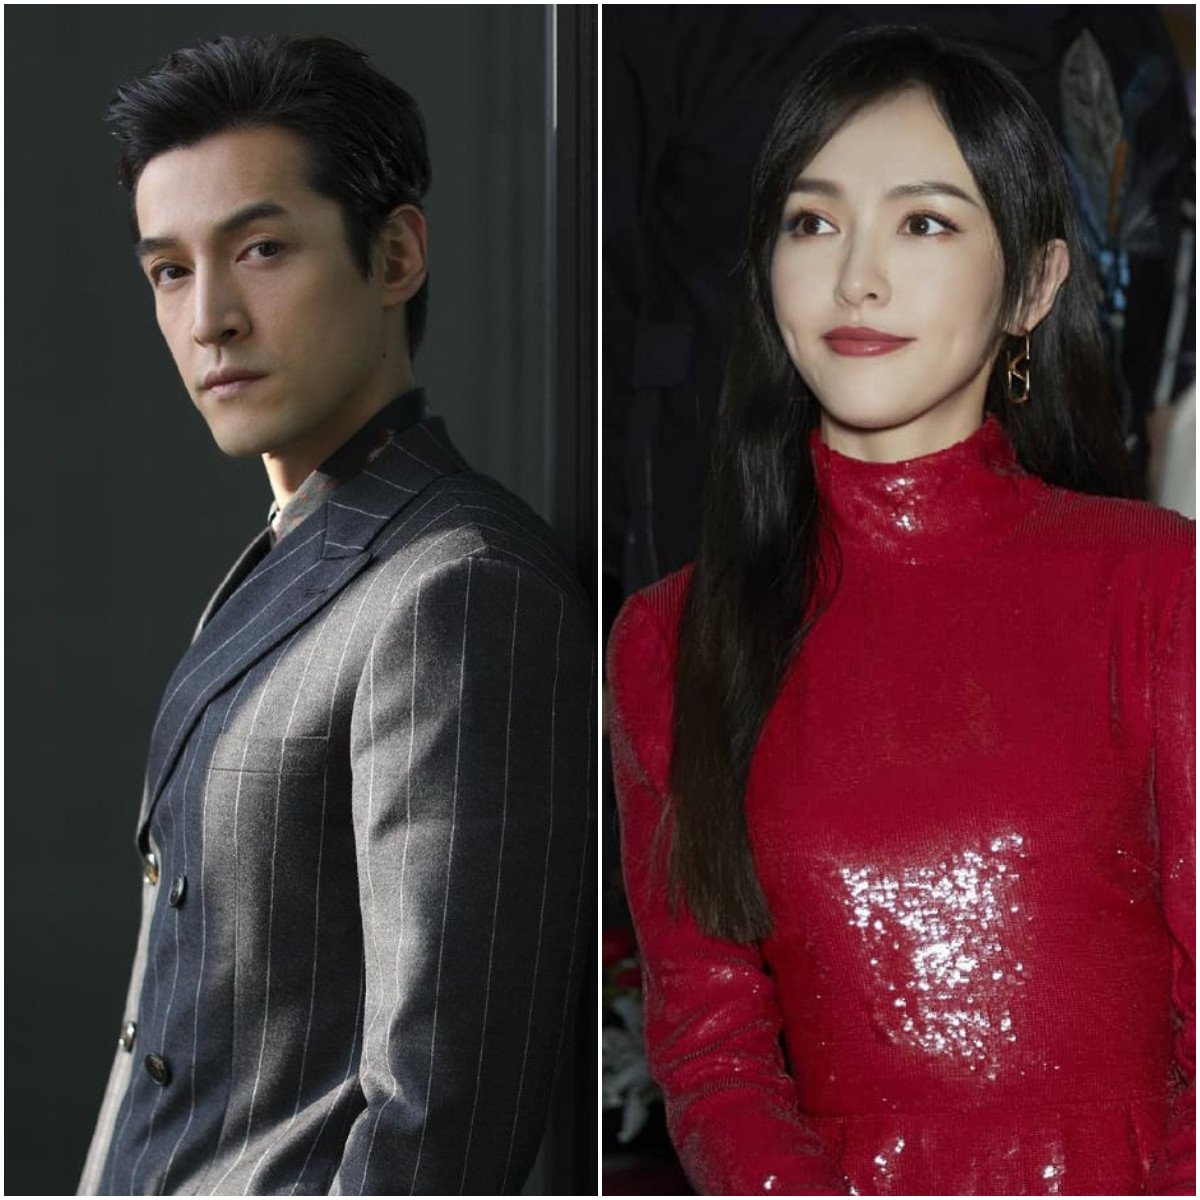 Wong Kar-wai’s new web series Blossoms Shanghai stars Chinese actors Hu Ge and Tiffany Tang. Photos: @huge.official, @celebs_fashion_style/Instagram